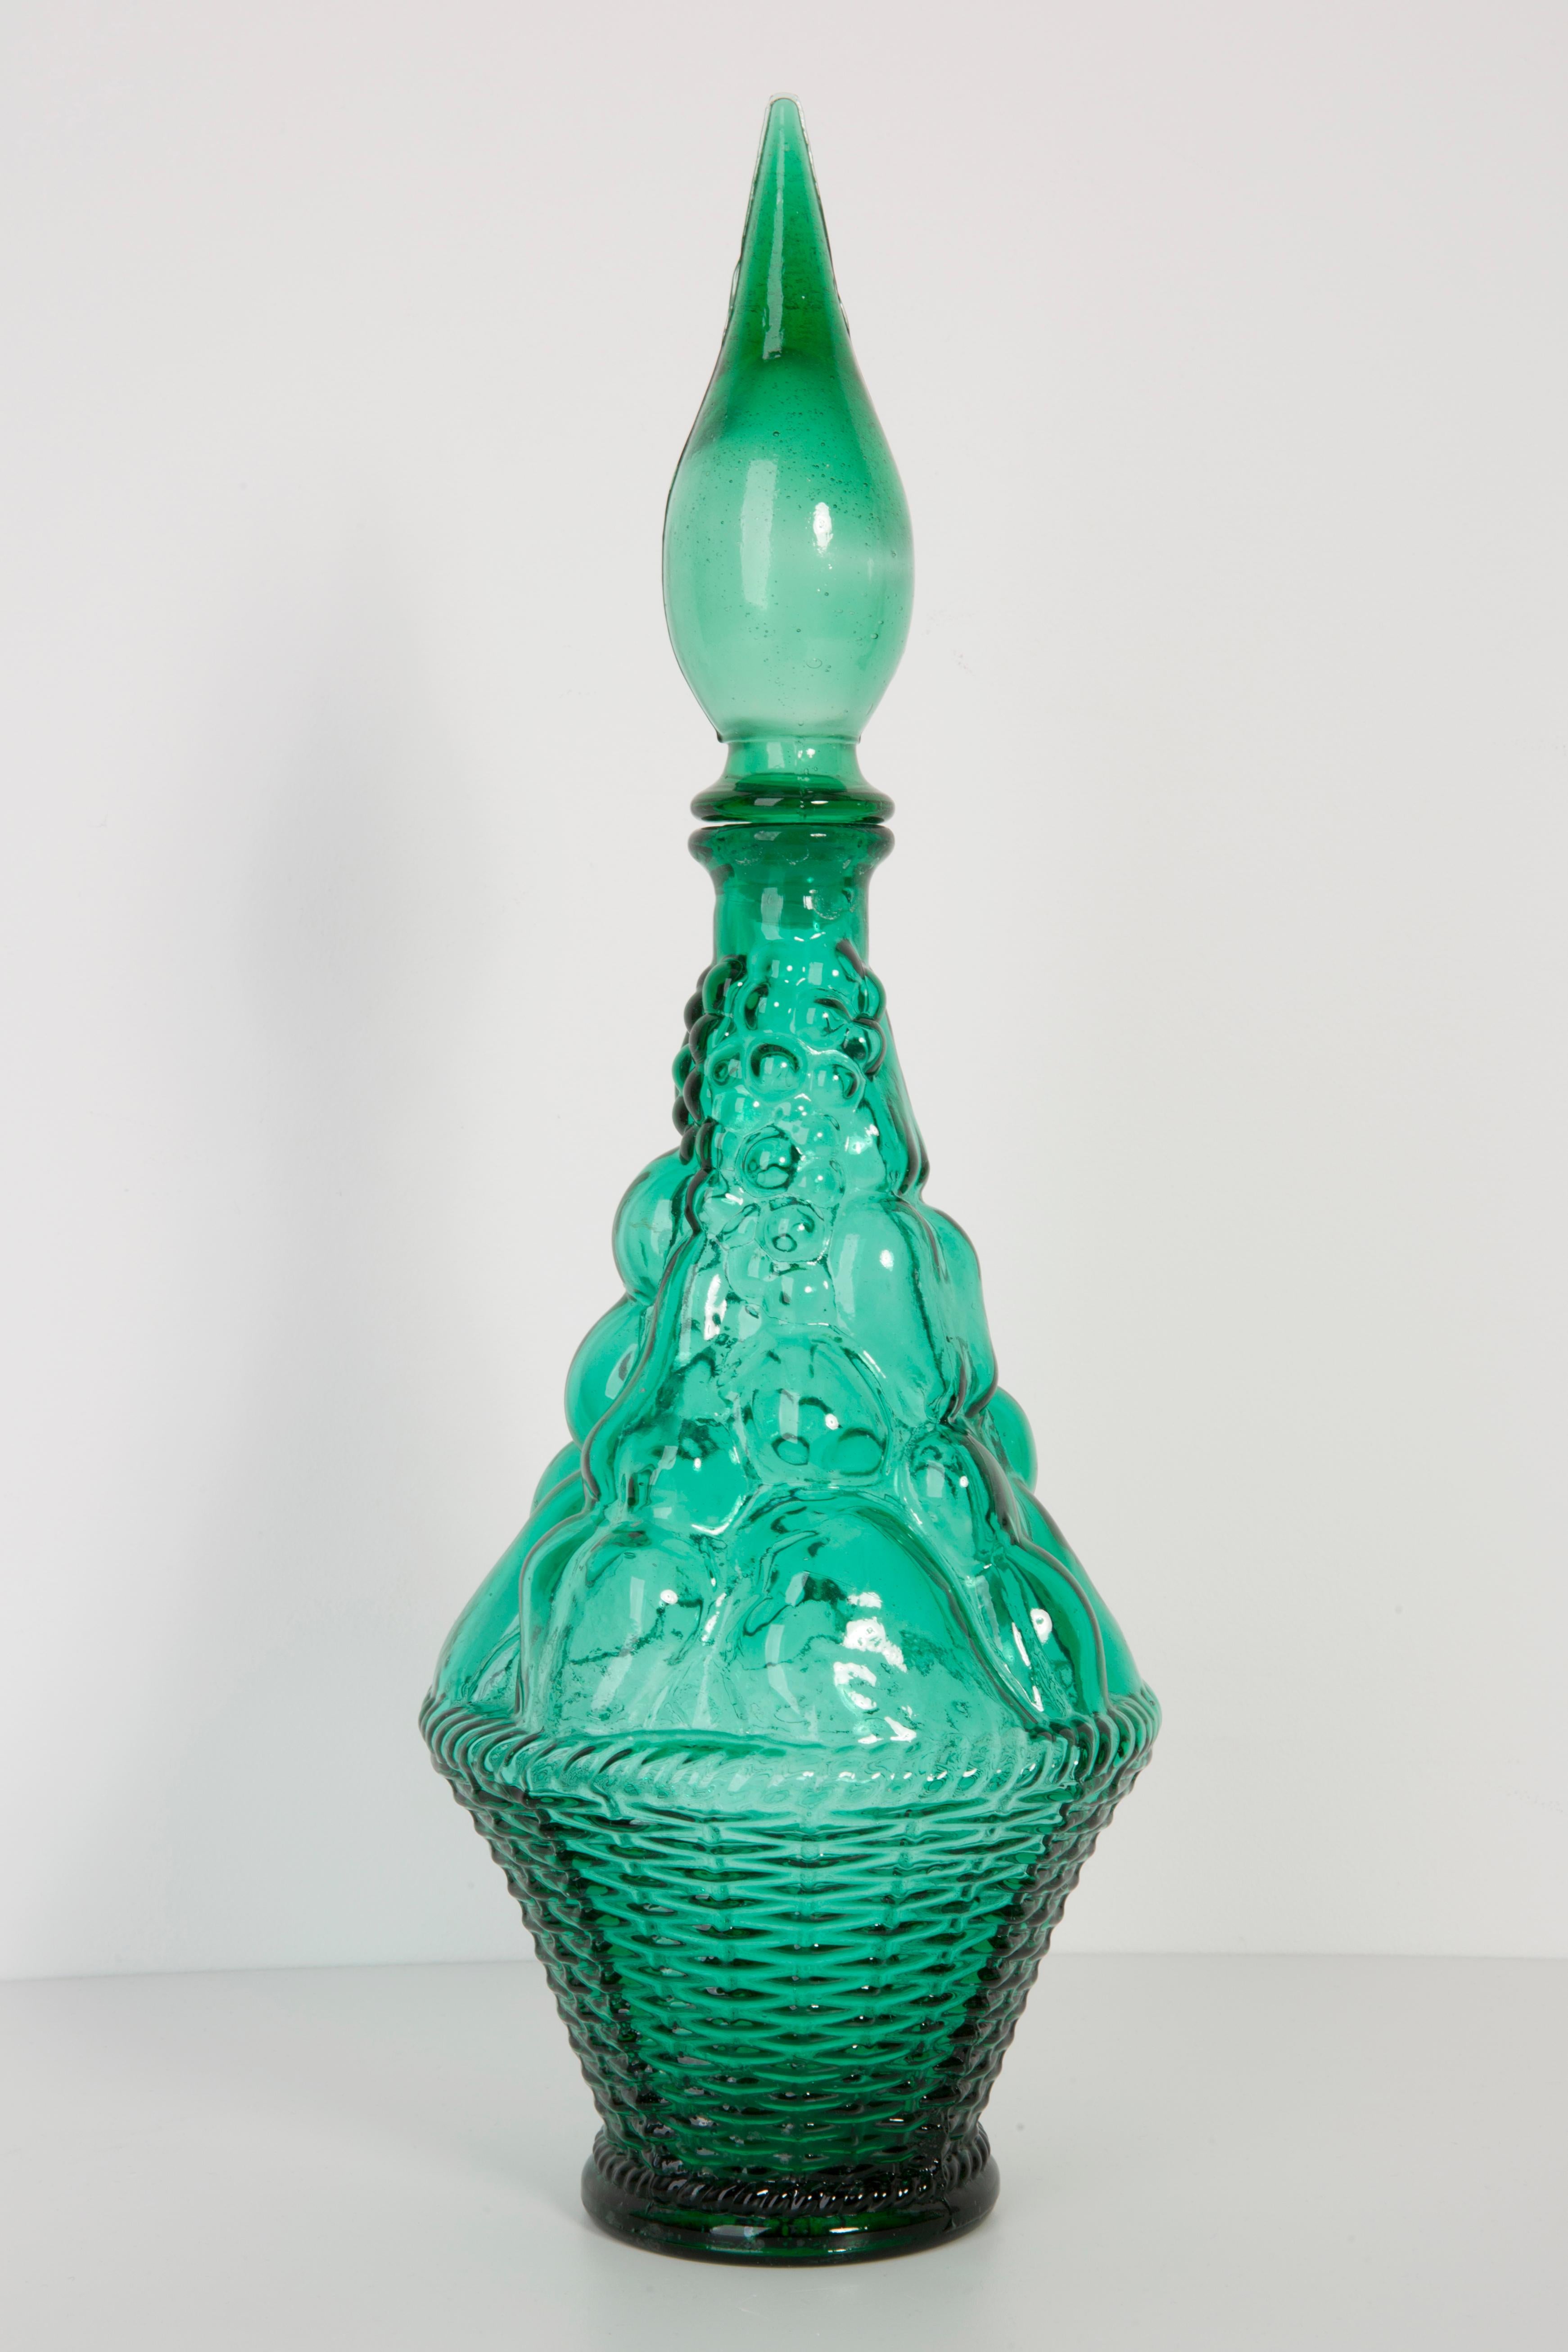 A stunning green glass decanters with geometric design, made by one of the many glass manufacturers based in the region of Empoli, Italy. Has 